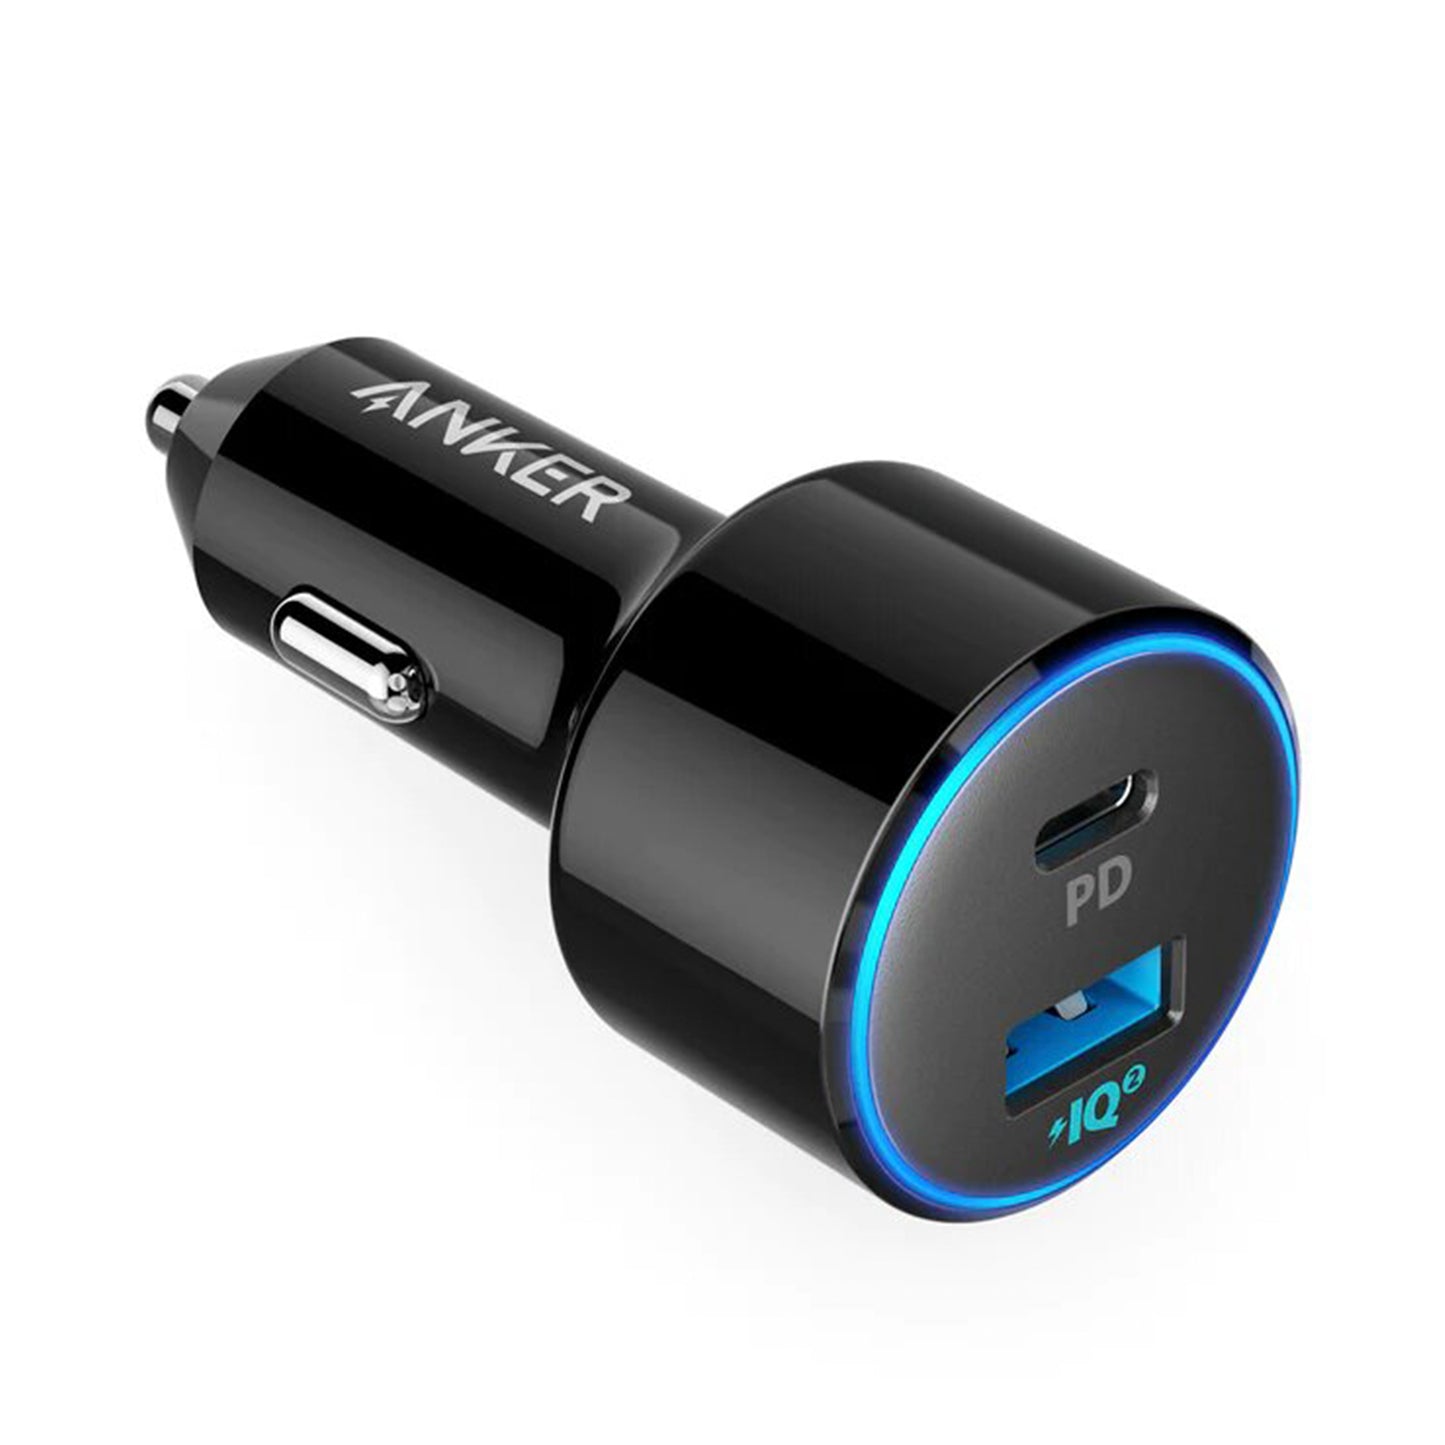 ANKER PowerDrive II Dual Port 30W Car Charger - Black